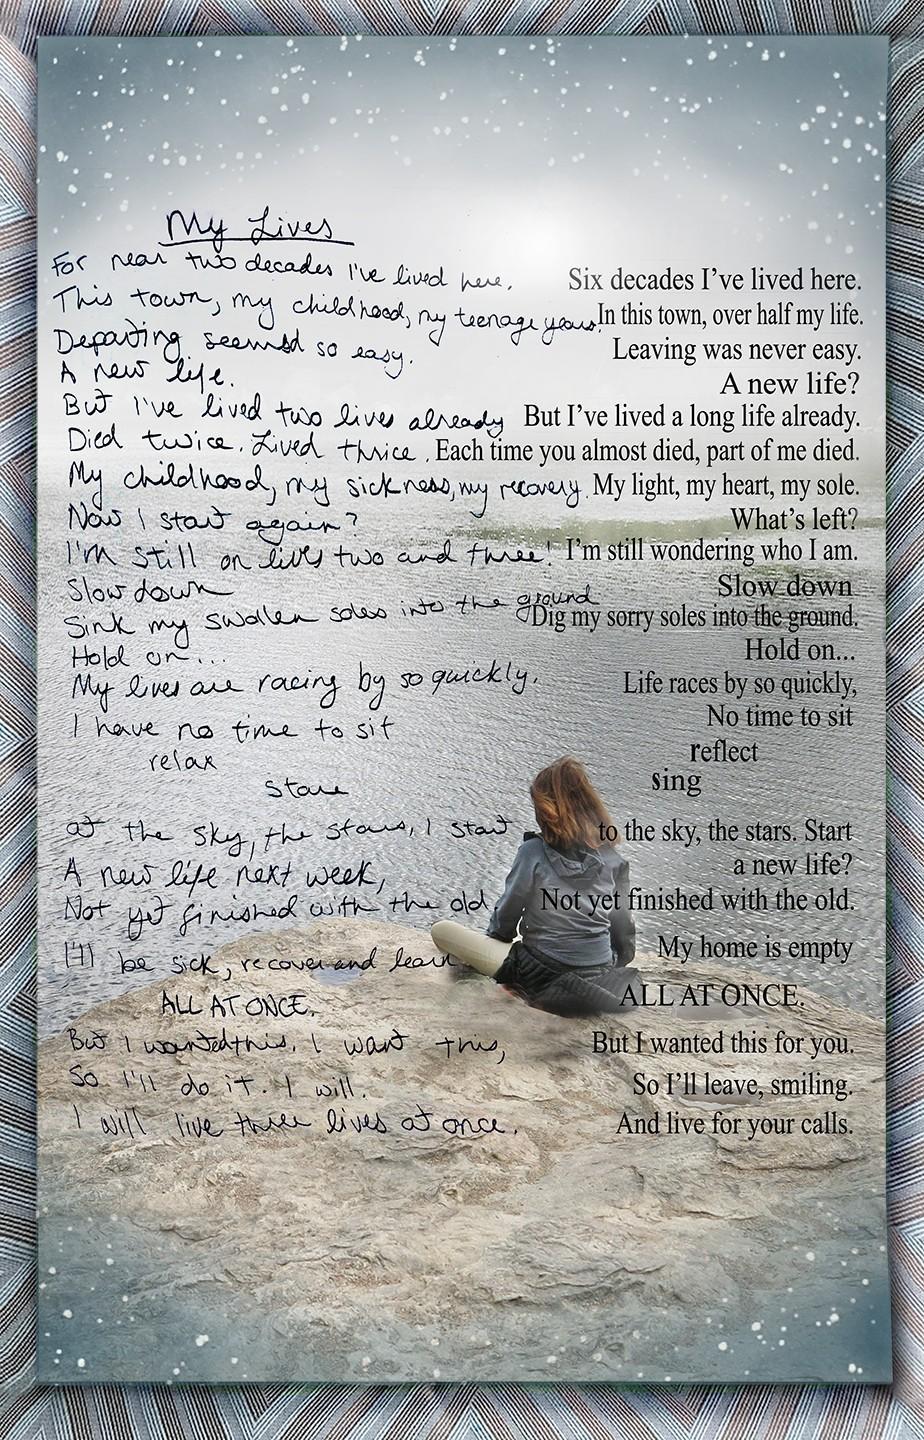 Robin Botie of Ithaca, New York Photoshops a duet of her words and the writings of her daughter who died of cancer.